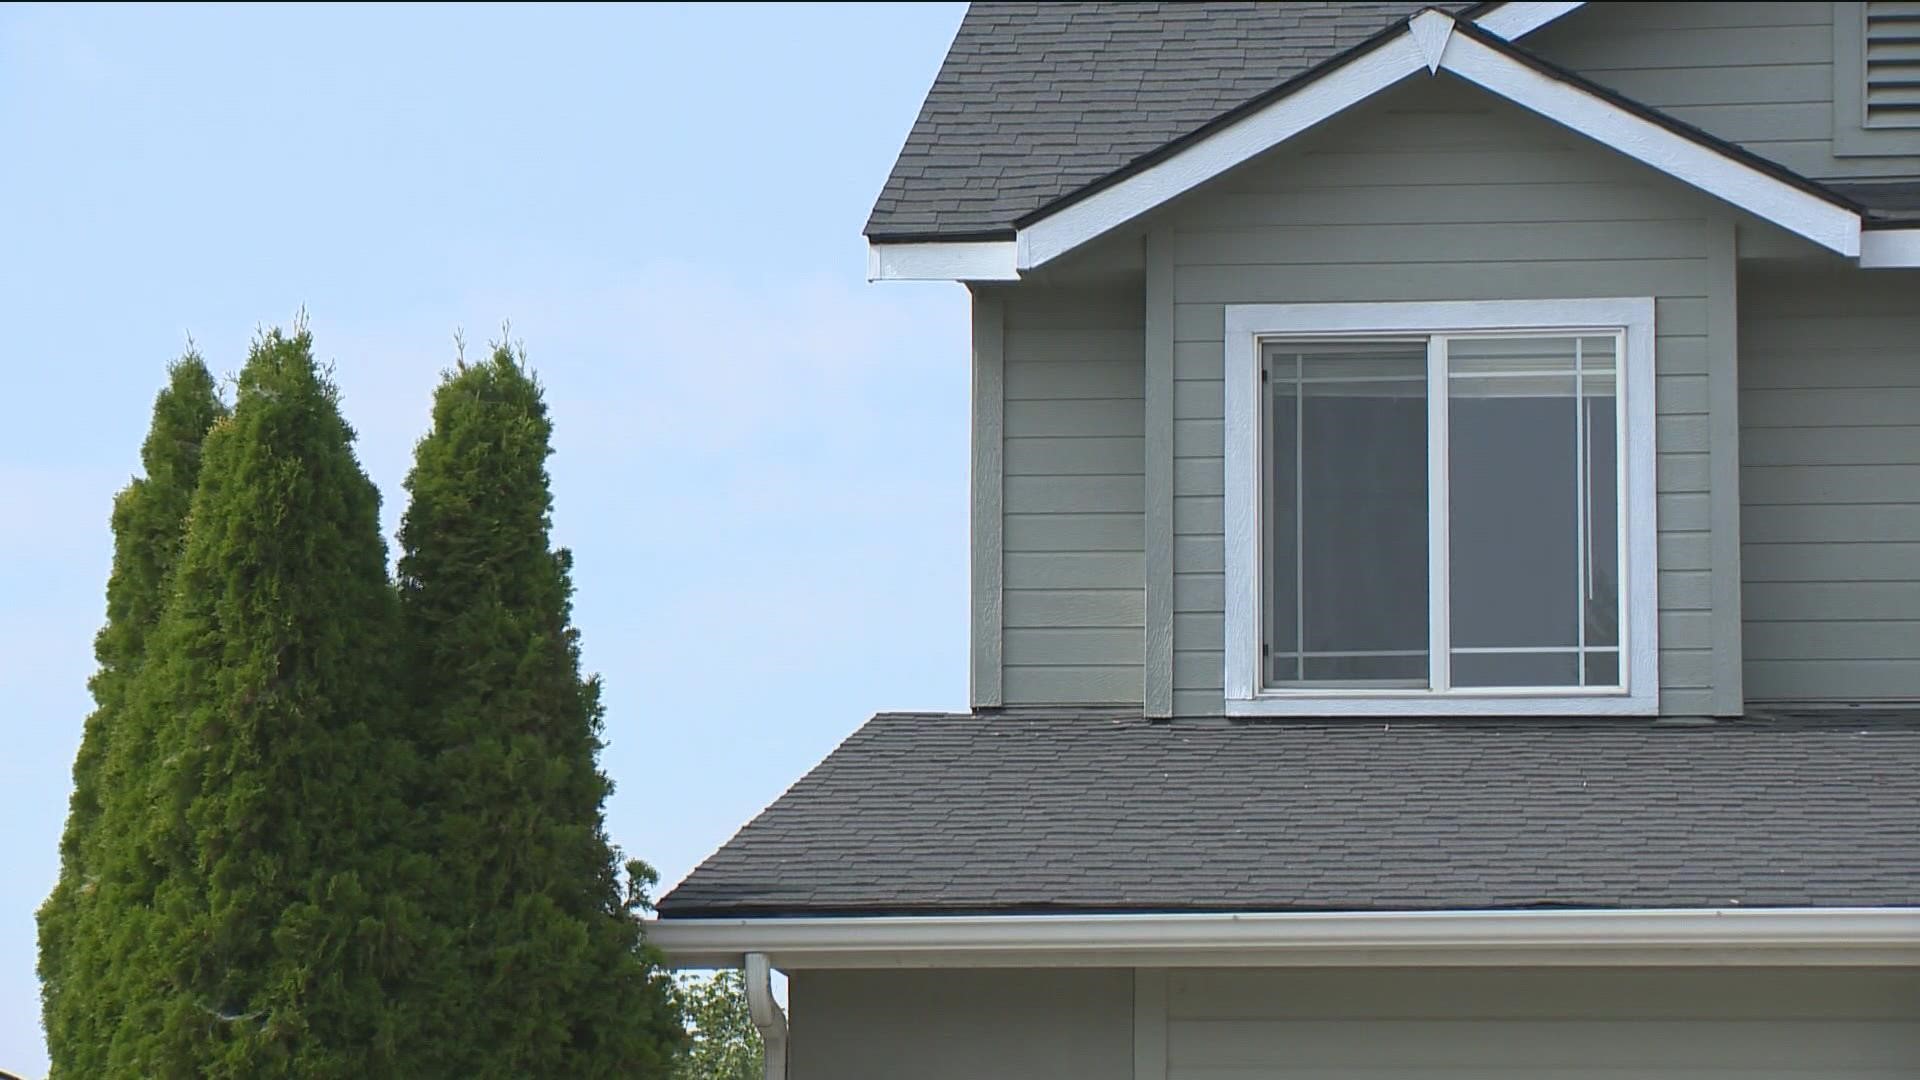 A longtime Nampa realtor says cities and counties can help increase more affordable housing inventory through changes to zoning code and other regulations.